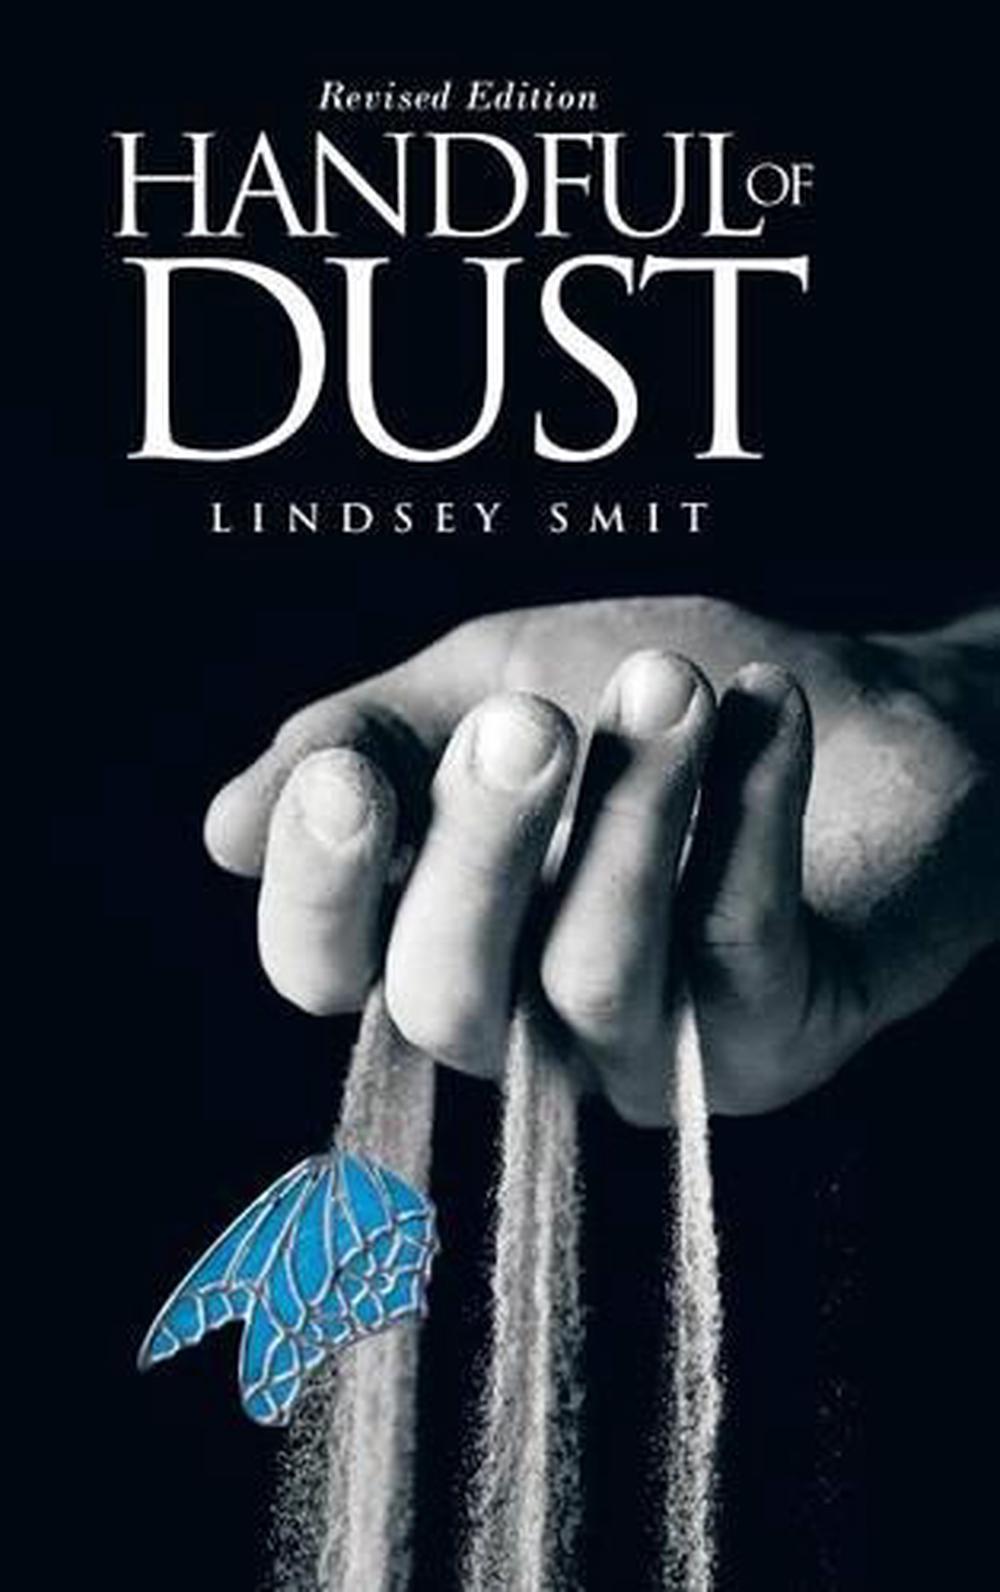 book a handful of dust